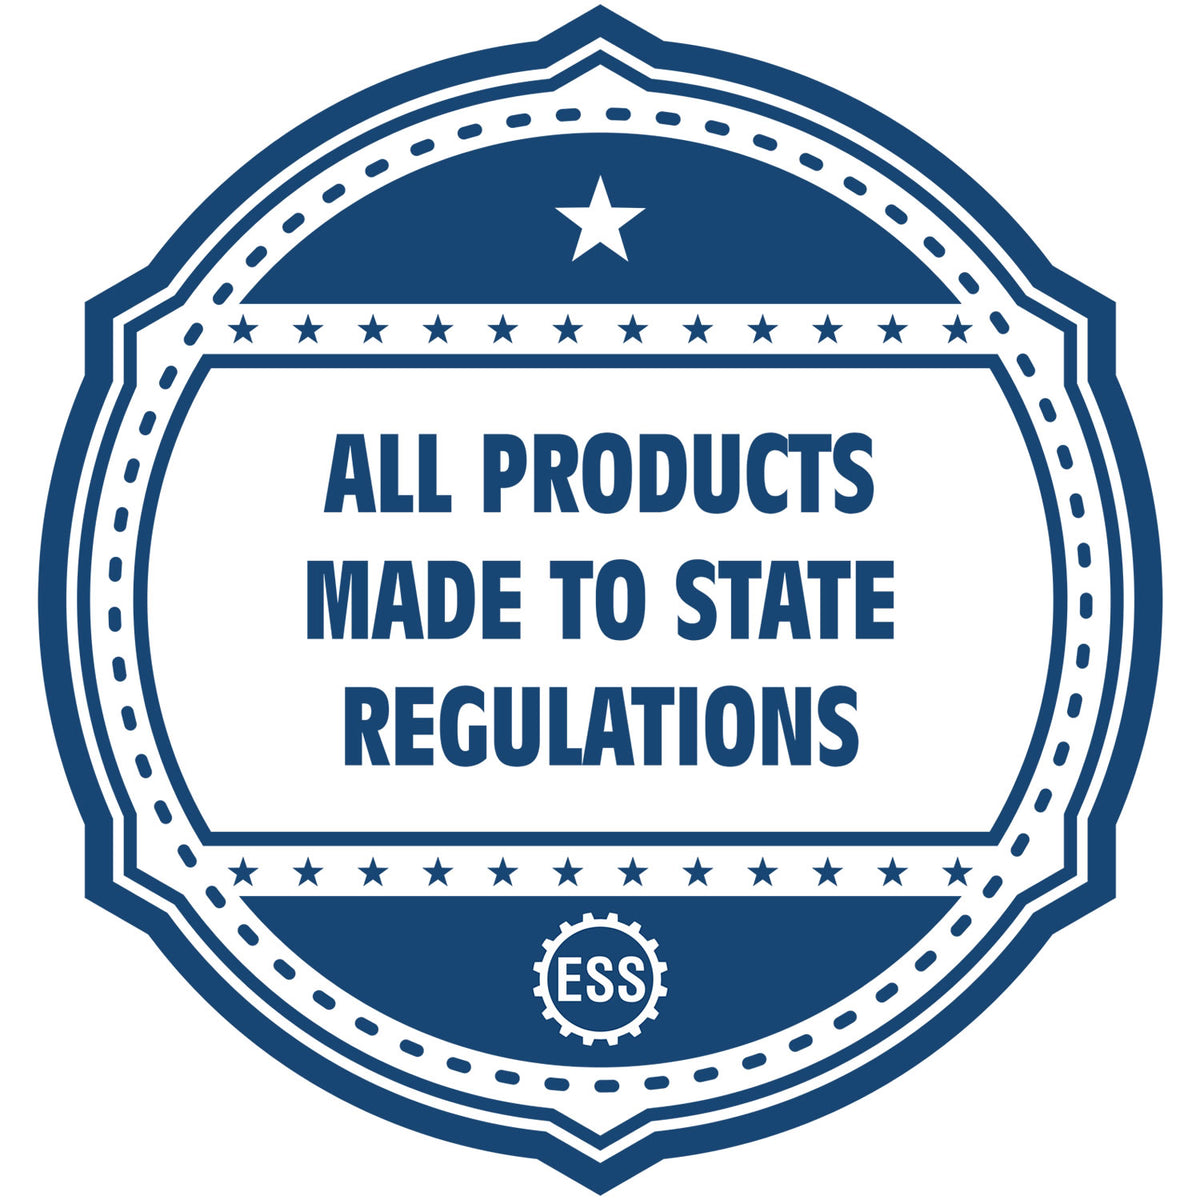 An icon or badge element for the Soft Massachusetts Professional Engineer Seal showing that this product is made in compliance with state regulations.